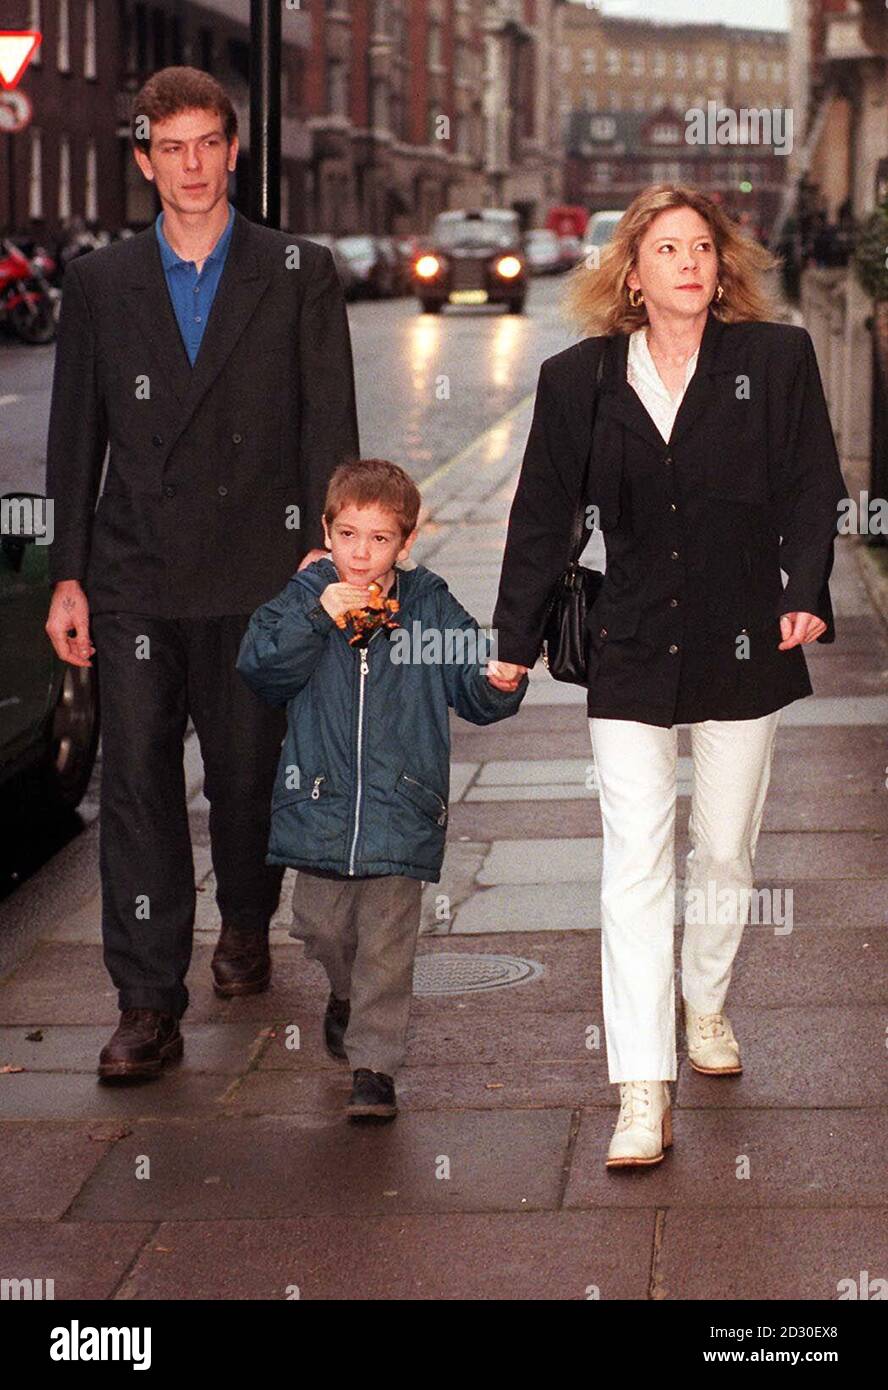 Robert Loveday and Mandy Evans with their son Luke at the General Medical Council, London.  Joshua, the couple's younger son died in 1995 after an operation conducted by Mr Dhasmana. 12/10/99: Professor Angelini told the inquiry he tried to stop the operation.  * on Joshua. 27/11/99:  to hear the continuing case against Bristol Royal Infirmary consultant surgeon, Mr Dhasmana, who is accused of continuing open heart surgery on children despite warnings about the high death rate. 12/11/99: Joshua's father became depressed and involved in petty crime before he was found dead, hanging, in Winson G Stock Photo